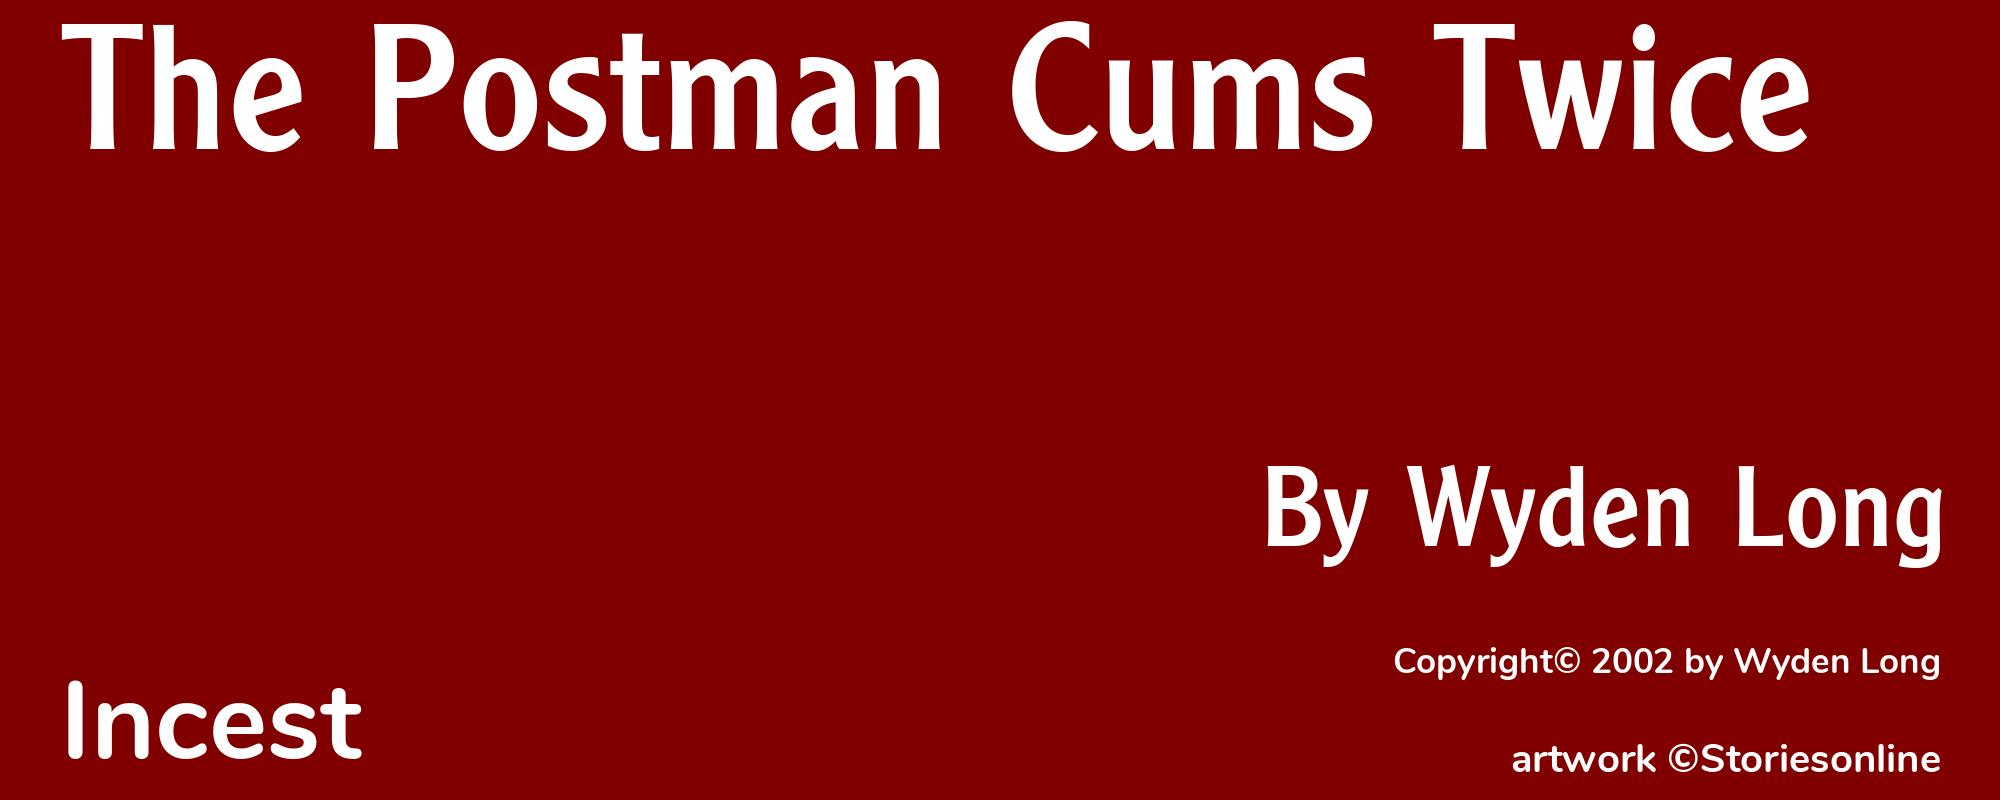 The Postman Cums Twice - Cover